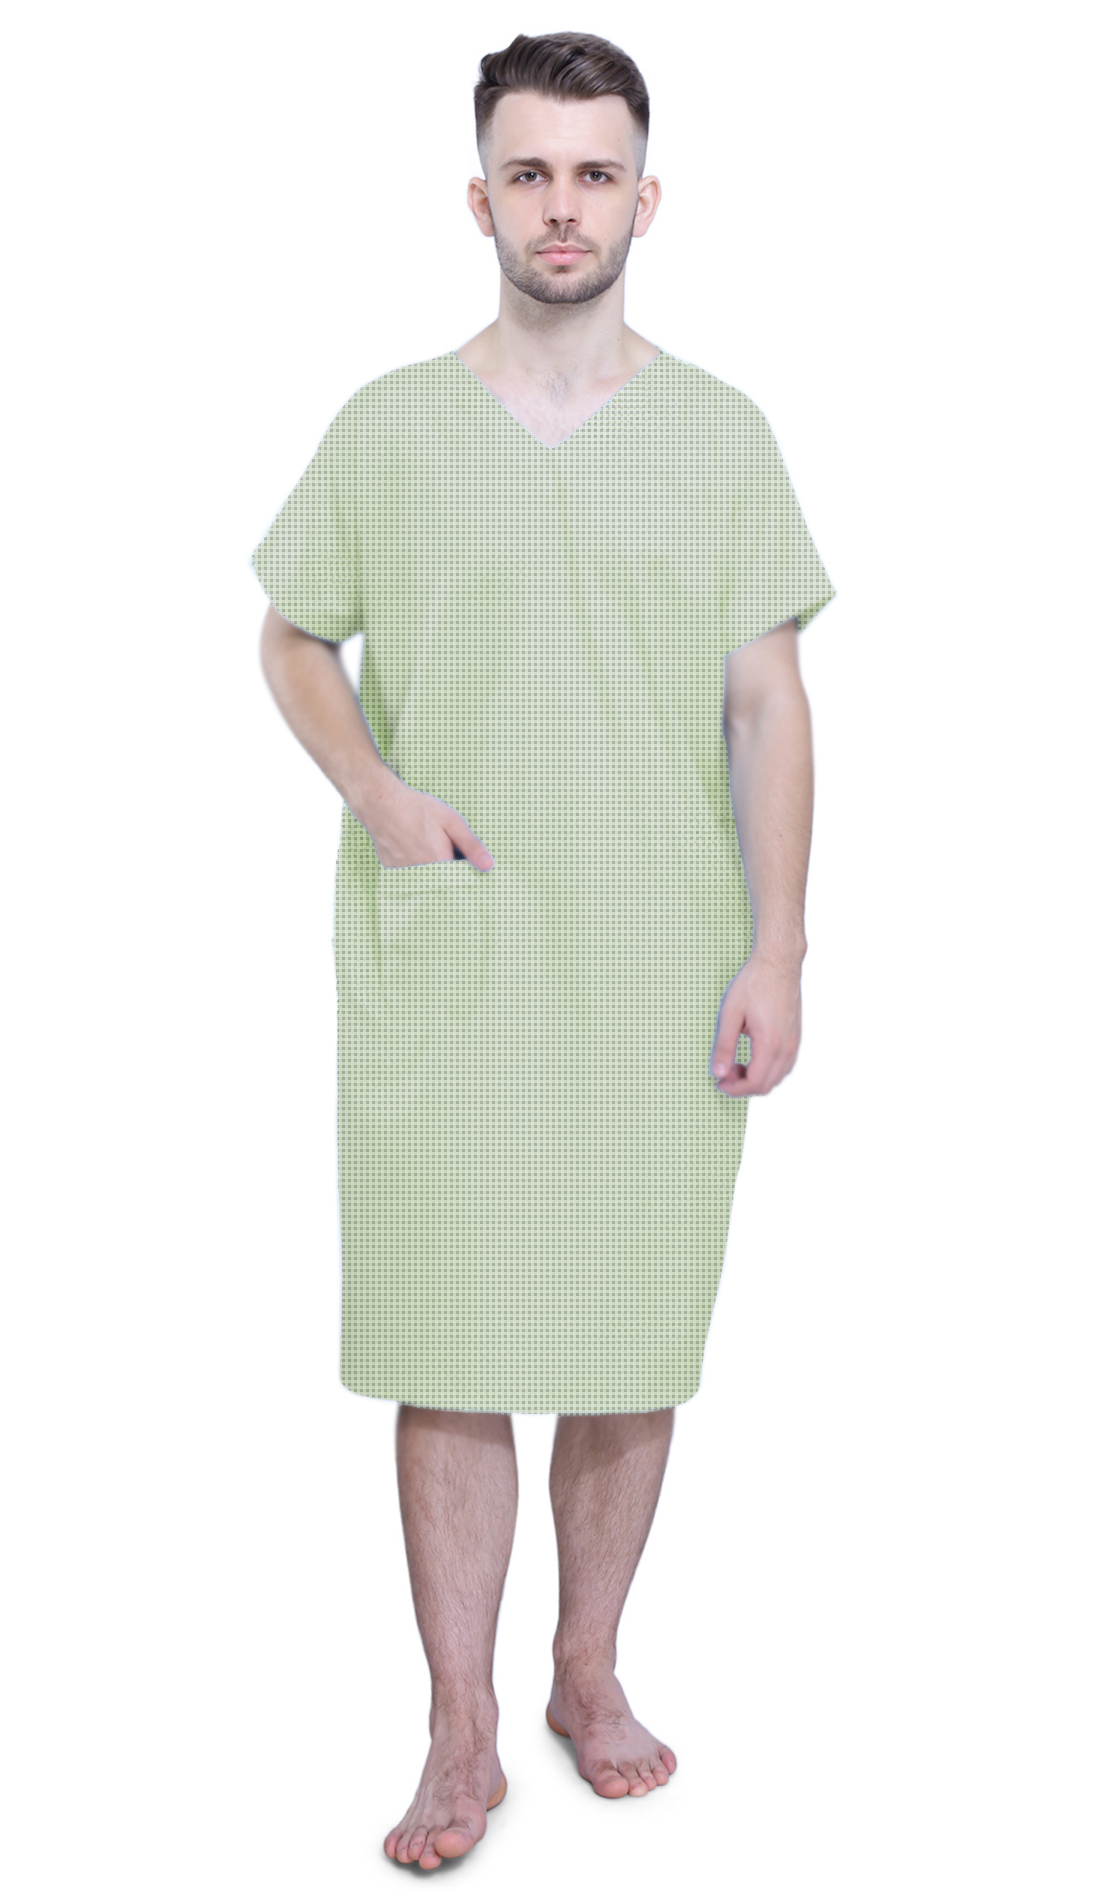 Adult Hospital Gown White with Bird Print Pack of 60 Medium Patient Gowns |  eBay